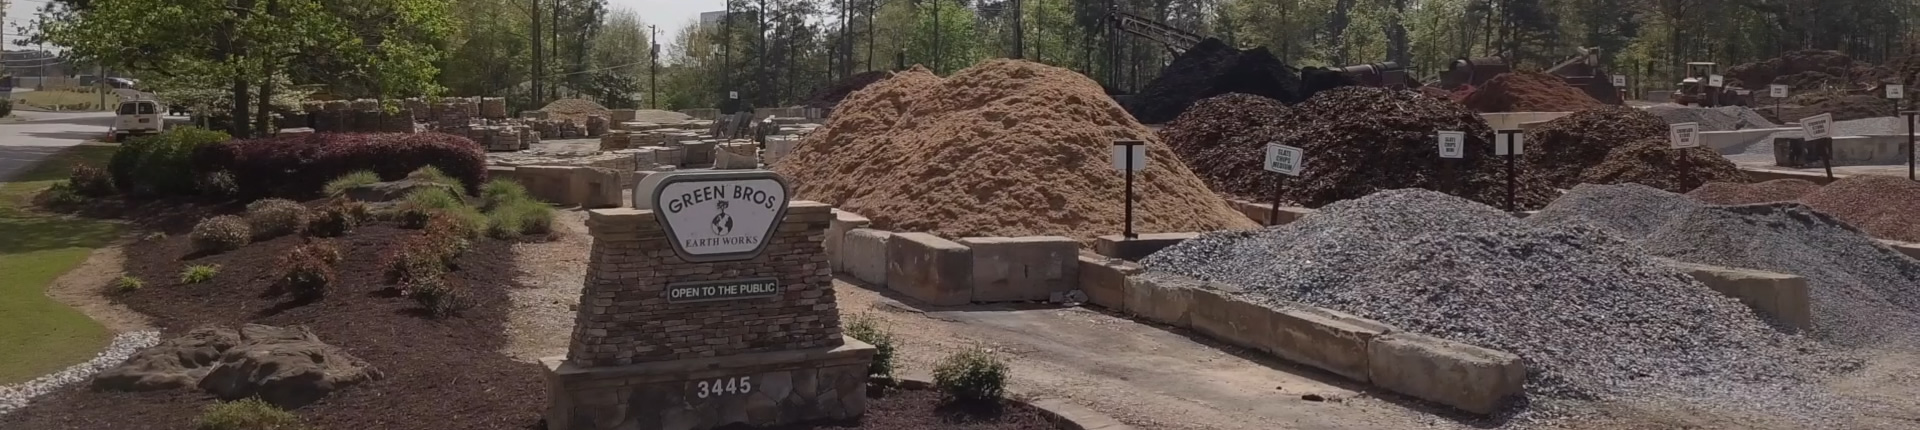 Kennesaw Ga Landscape Supply Materials, Landscaping Companies In Kennesaw Ga